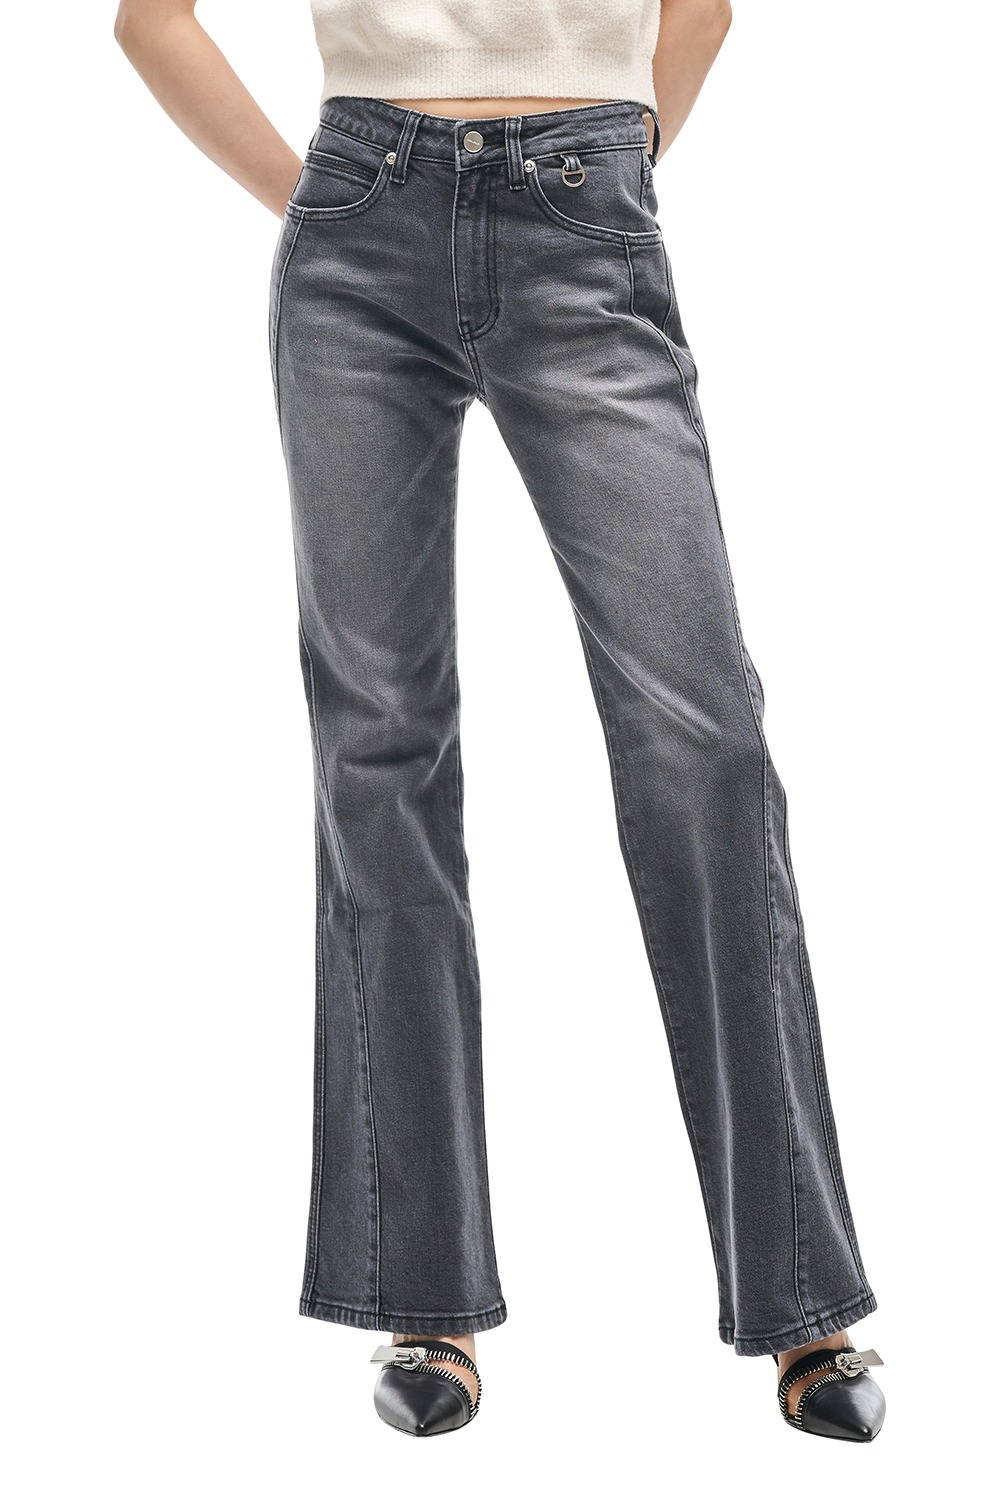 DIVIDED BOOTCUT JEANS DARK GRAY